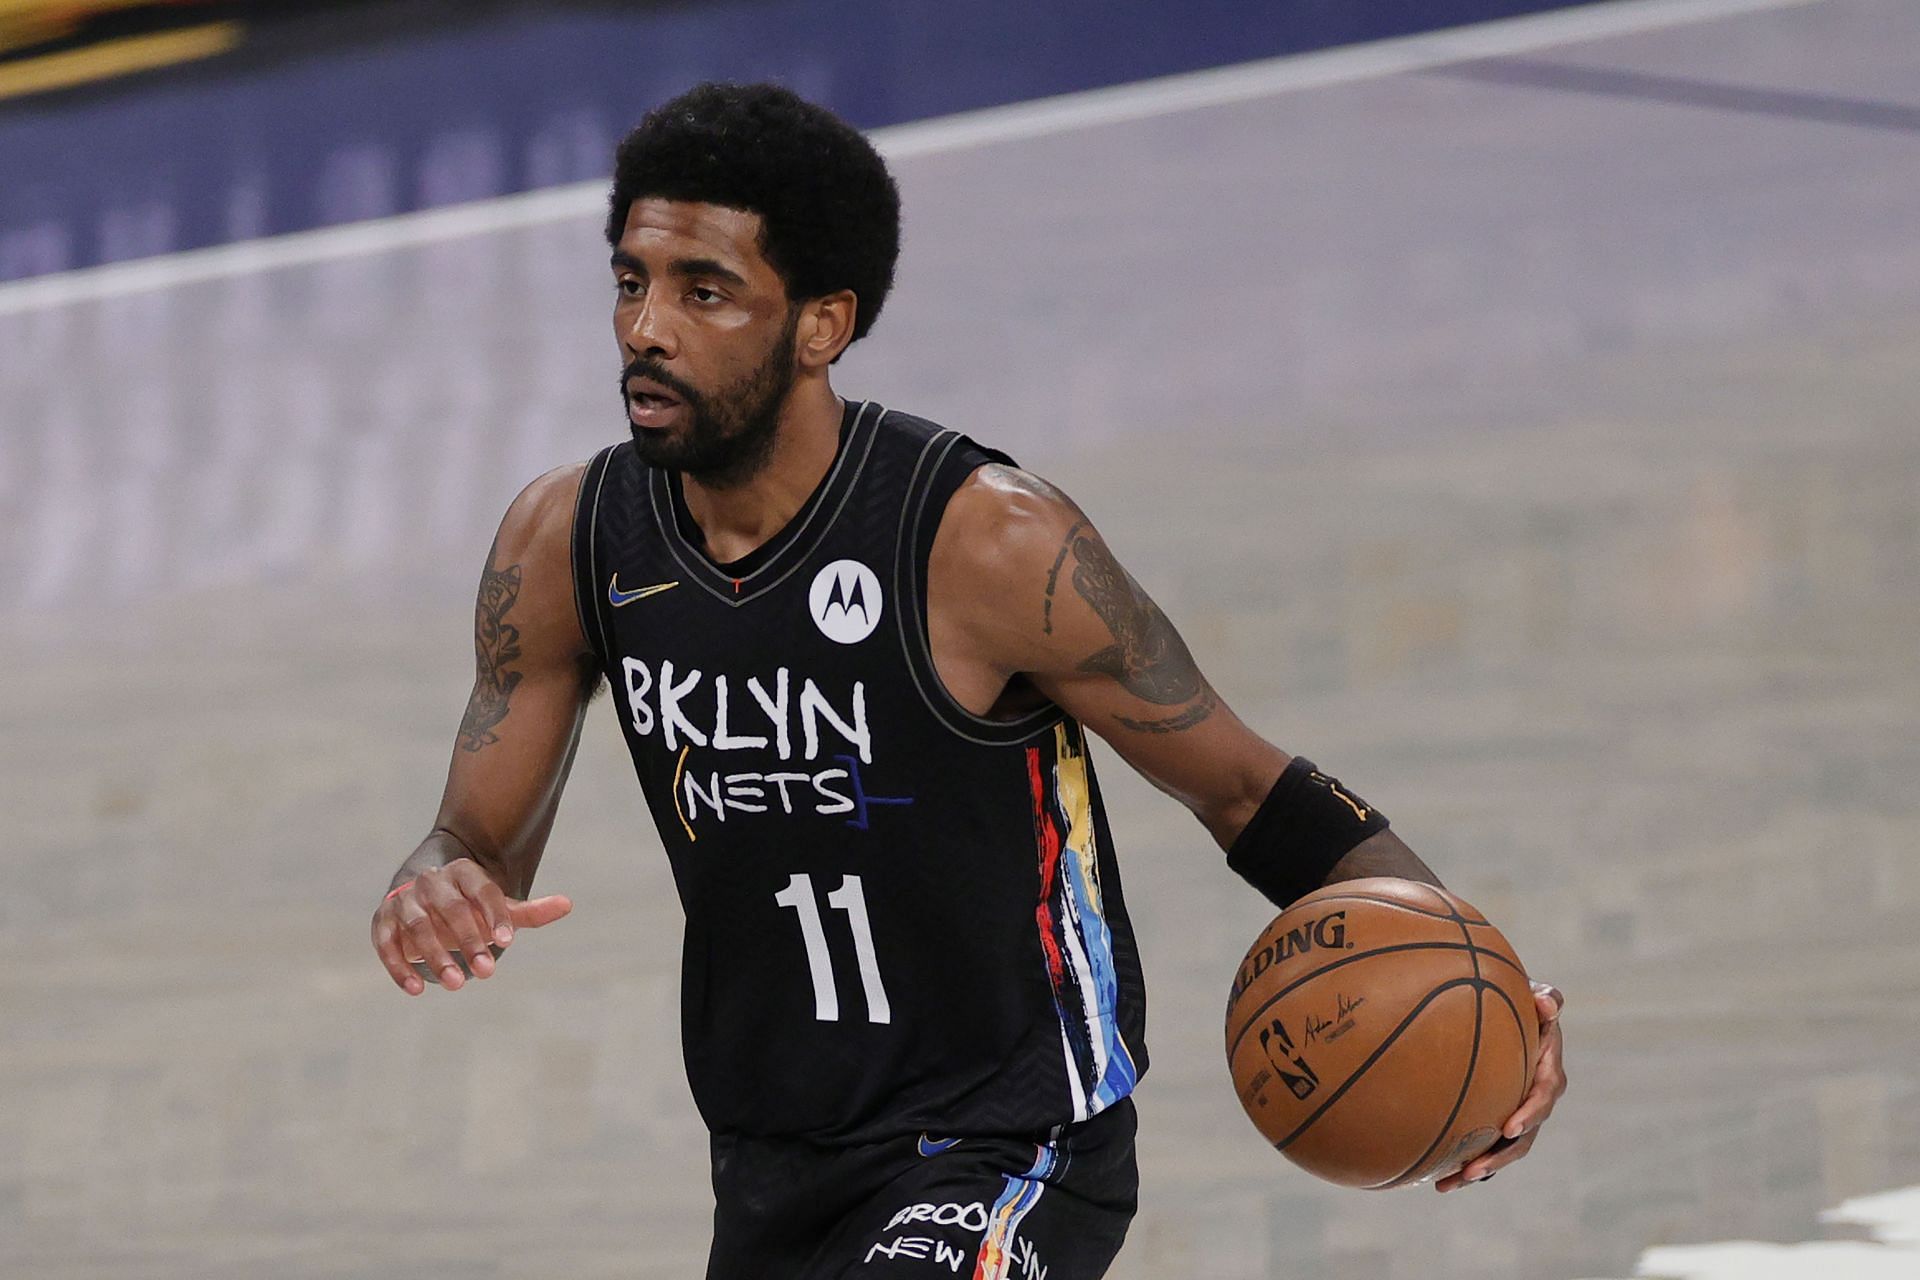 Kyrie Irving will be playing for the Brooklyn Nets in away games this season.